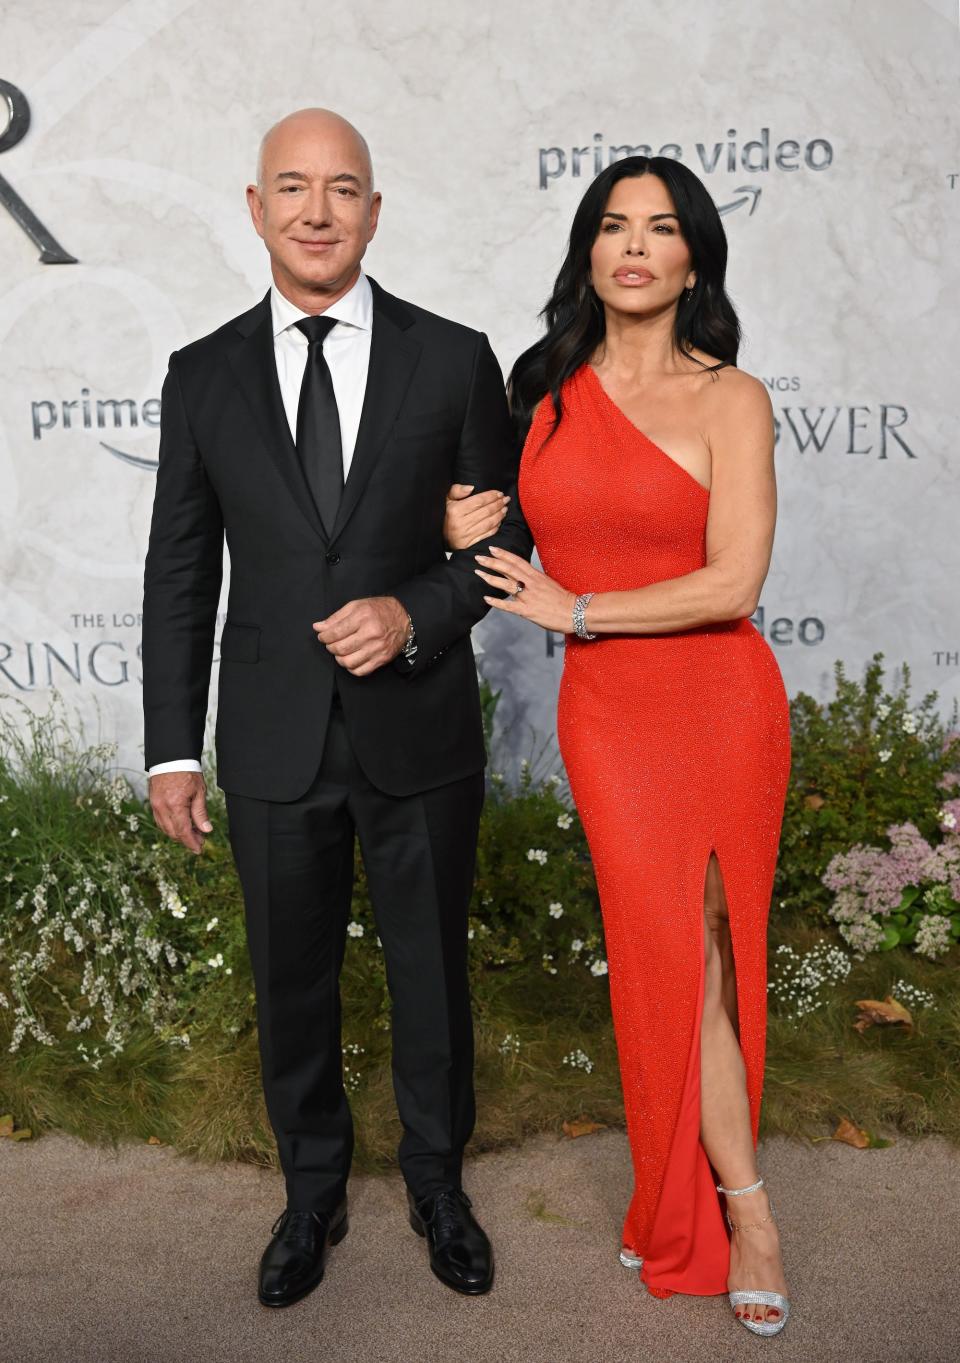 Jeff Bezos and Lauren Sanchez attend "The Lord Of The Rings: The Rings Of Power" premiere in London in August 2022.